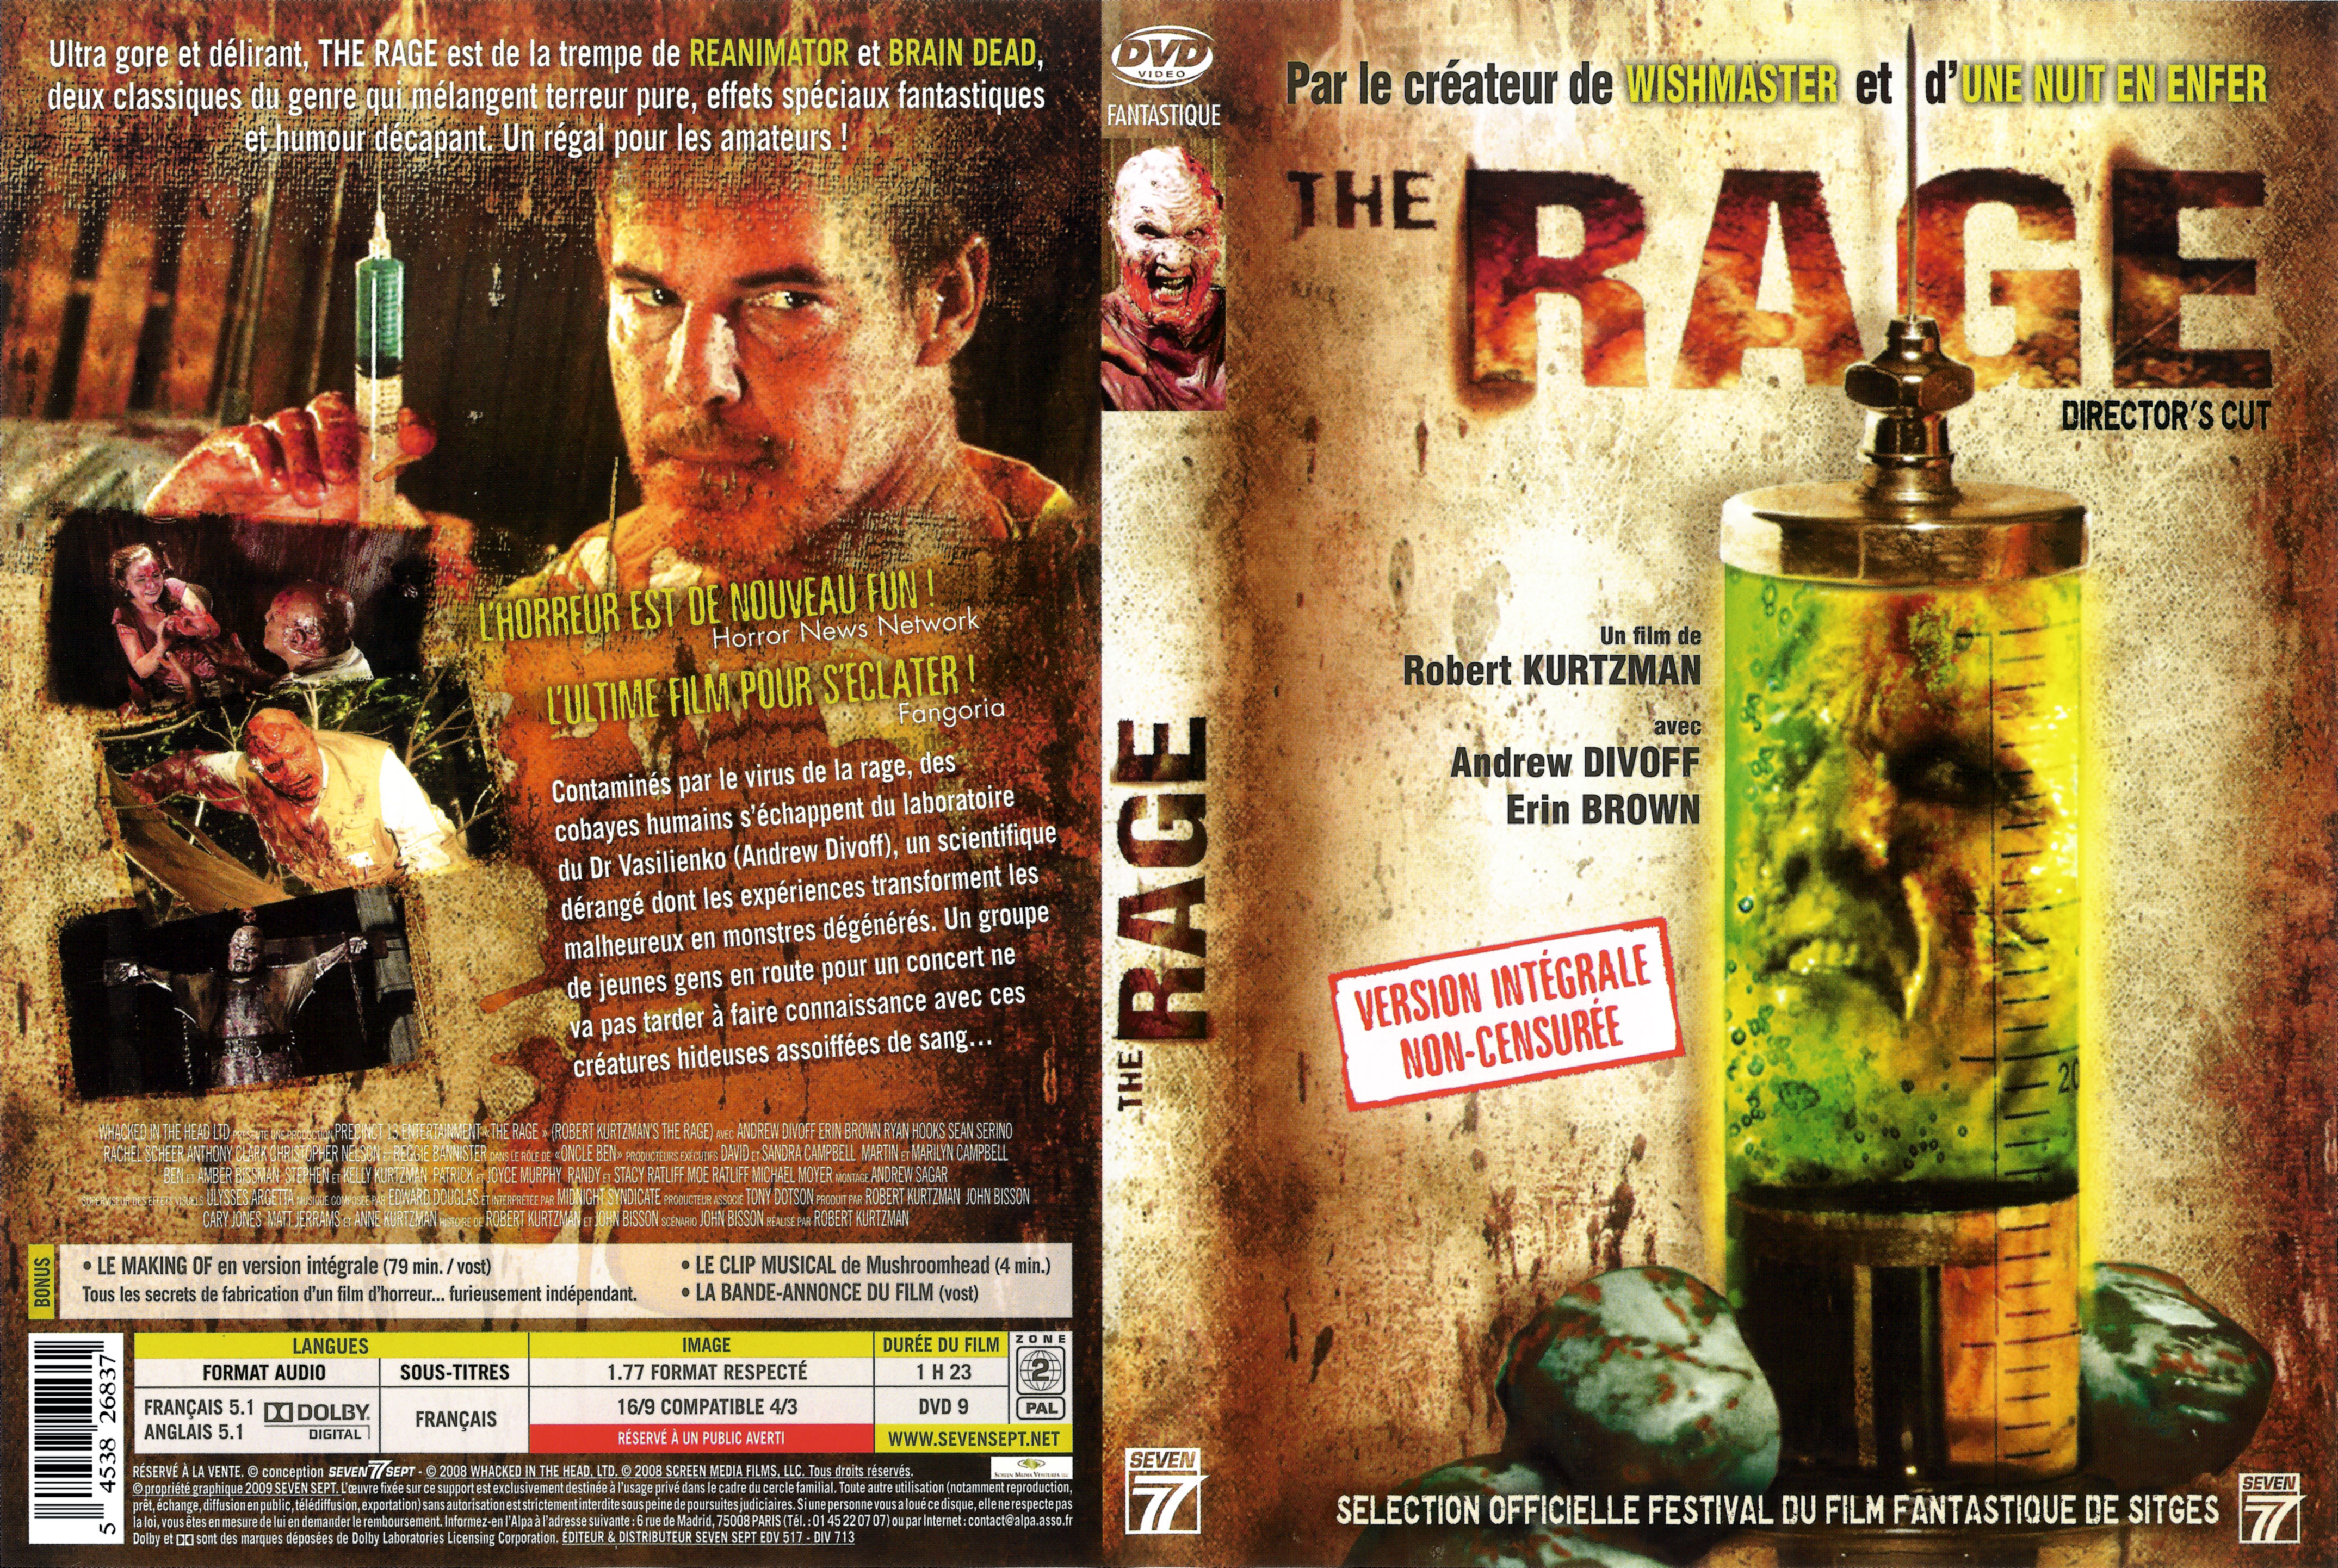 Jaquette DVD The rage